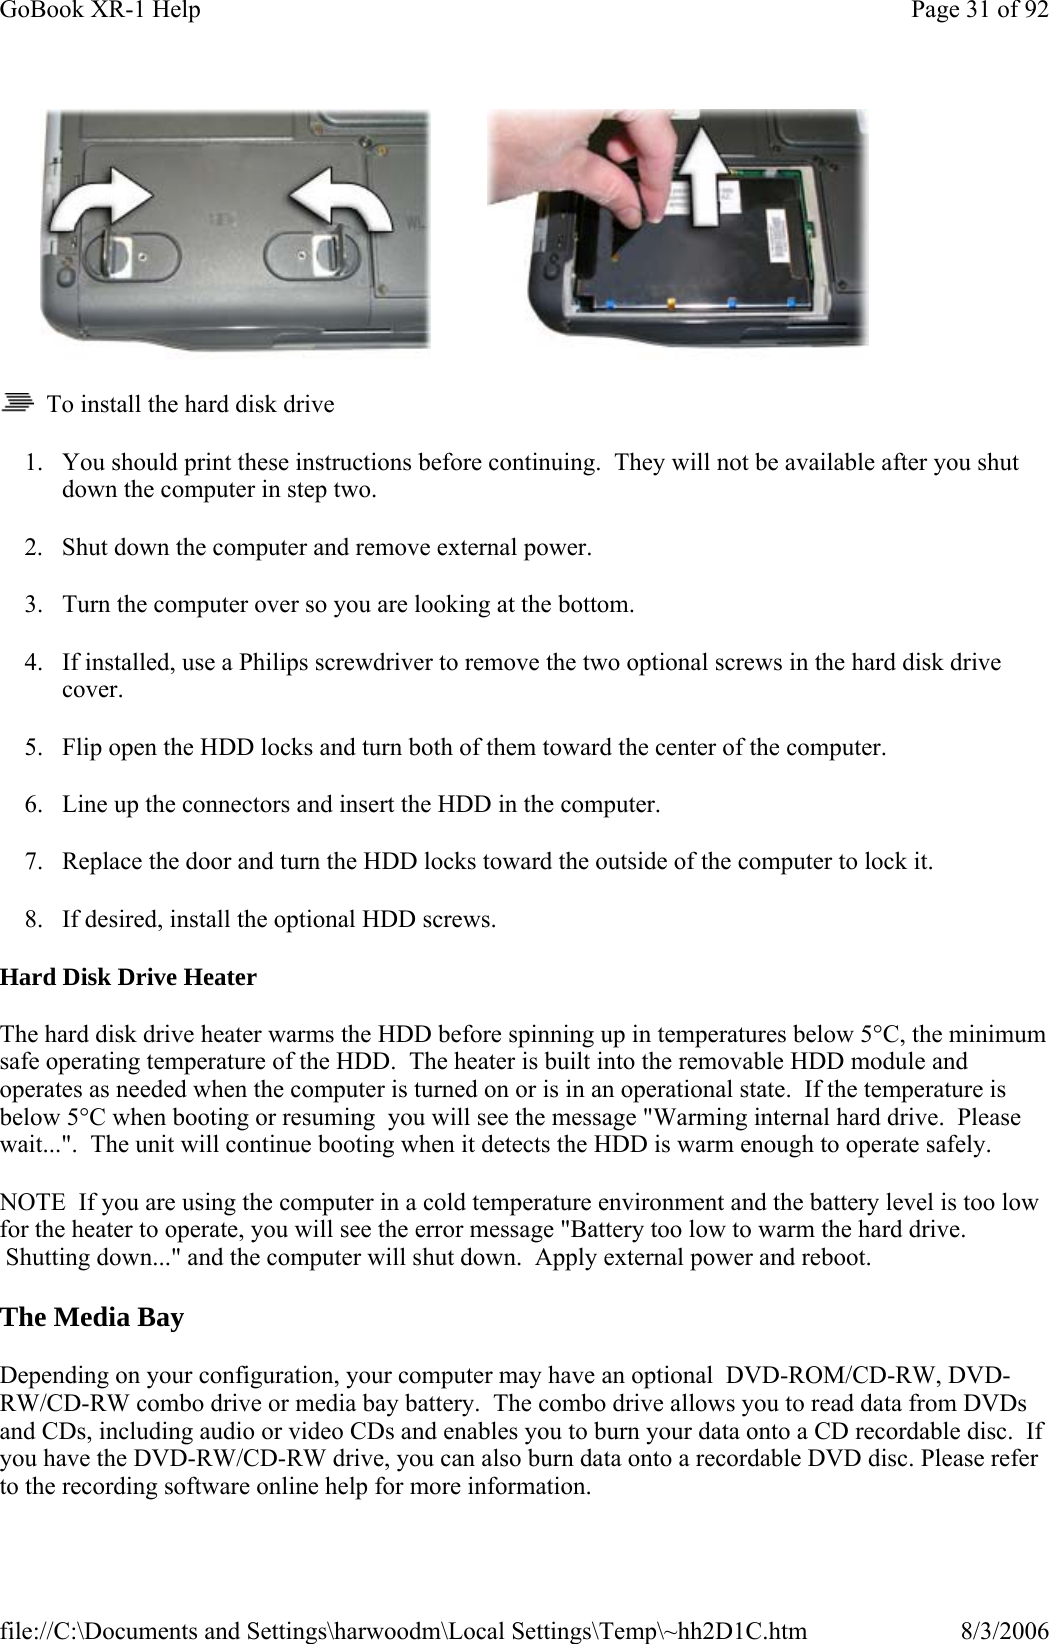   To install the hard disk drive 1. You should print these instructions before continuing.  They will not be available after you shut down the computer in step two. 2. Shut down the computer and remove external power. 3. Turn the computer over so you are looking at the bottom. 4. If installed, use a Philips screwdriver to remove the two optional screws in the hard disk drive cover. 5. Flip open the HDD locks and turn both of them toward the center of the computer. 6. Line up the connectors and insert the HDD in the computer. 7. Replace the door and turn the HDD locks toward the outside of the computer to lock it. 8. If desired, install the optional HDD screws. Hard Disk Drive Heater The hard disk drive heater warms the HDD before spinning up in temperatures below 5°C, the minimum safe operating temperature of the HDD.  The heater is built into the removable HDD module and operates as needed when the computer is turned on or is in an operational state.  If the temperature is below 5°C when booting or resuming  you will see the message &quot;Warming internal hard drive.  Please wait...&quot;.  The unit will continue booting when it detects the HDD is warm enough to operate safely. NOTE  If you are using the computer in a cold temperature environment and the battery level is too low for the heater to operate, you will see the error message &quot;Battery too low to warm the hard drive.  Shutting down...&quot; and the computer will shut down.  Apply external power and reboot. The Media Bay Depending on your configuration, your computer may have an optional  DVD-ROM/CD-RW, DVD-RW/CD-RW combo drive or media bay battery.  The combo drive allows you to read data from DVDs and CDs, including audio or video CDs and enables you to burn your data onto a CD recordable disc.  If you have the DVD-RW/CD-RW drive, you can also burn data onto a recordable DVD disc. Please refer to the recording software online help for more information.Page 31 of 92GoBook XR-1 Help8/3/2006file://C:\Documents and Settings\harwoodm\Local Settings\Temp\~hh2D1C.htm